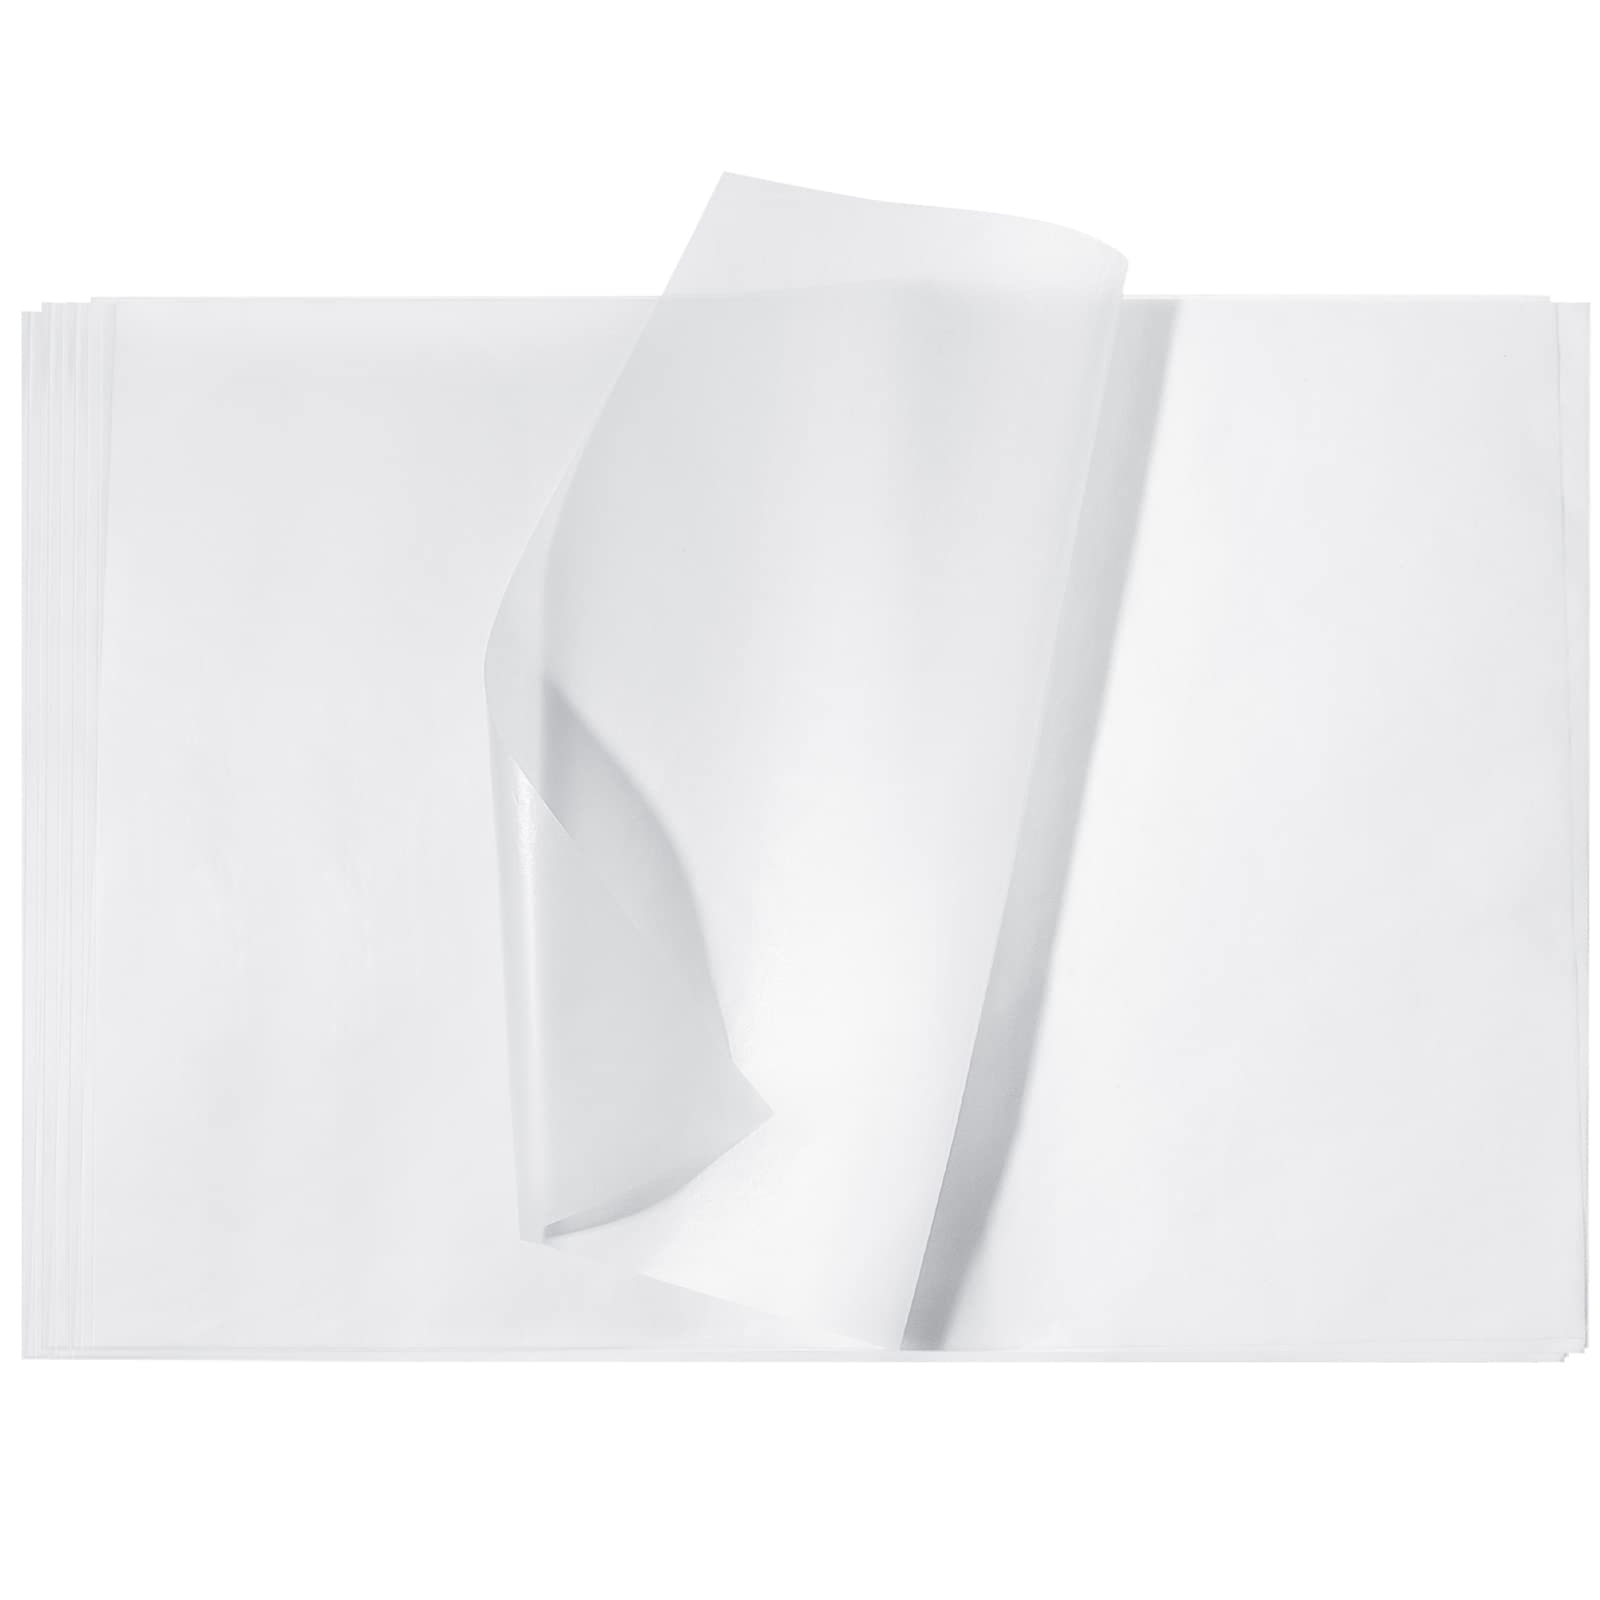 120 Sheets Deli Paper Sheets Transparent Paper Translucent Clear Paper  Tracing Paper for Drawing Wax Paper Printing Sketching Calligraphy Pencil  Ink Markers, White (9 x 13 Inch) 9 x 13 Inches